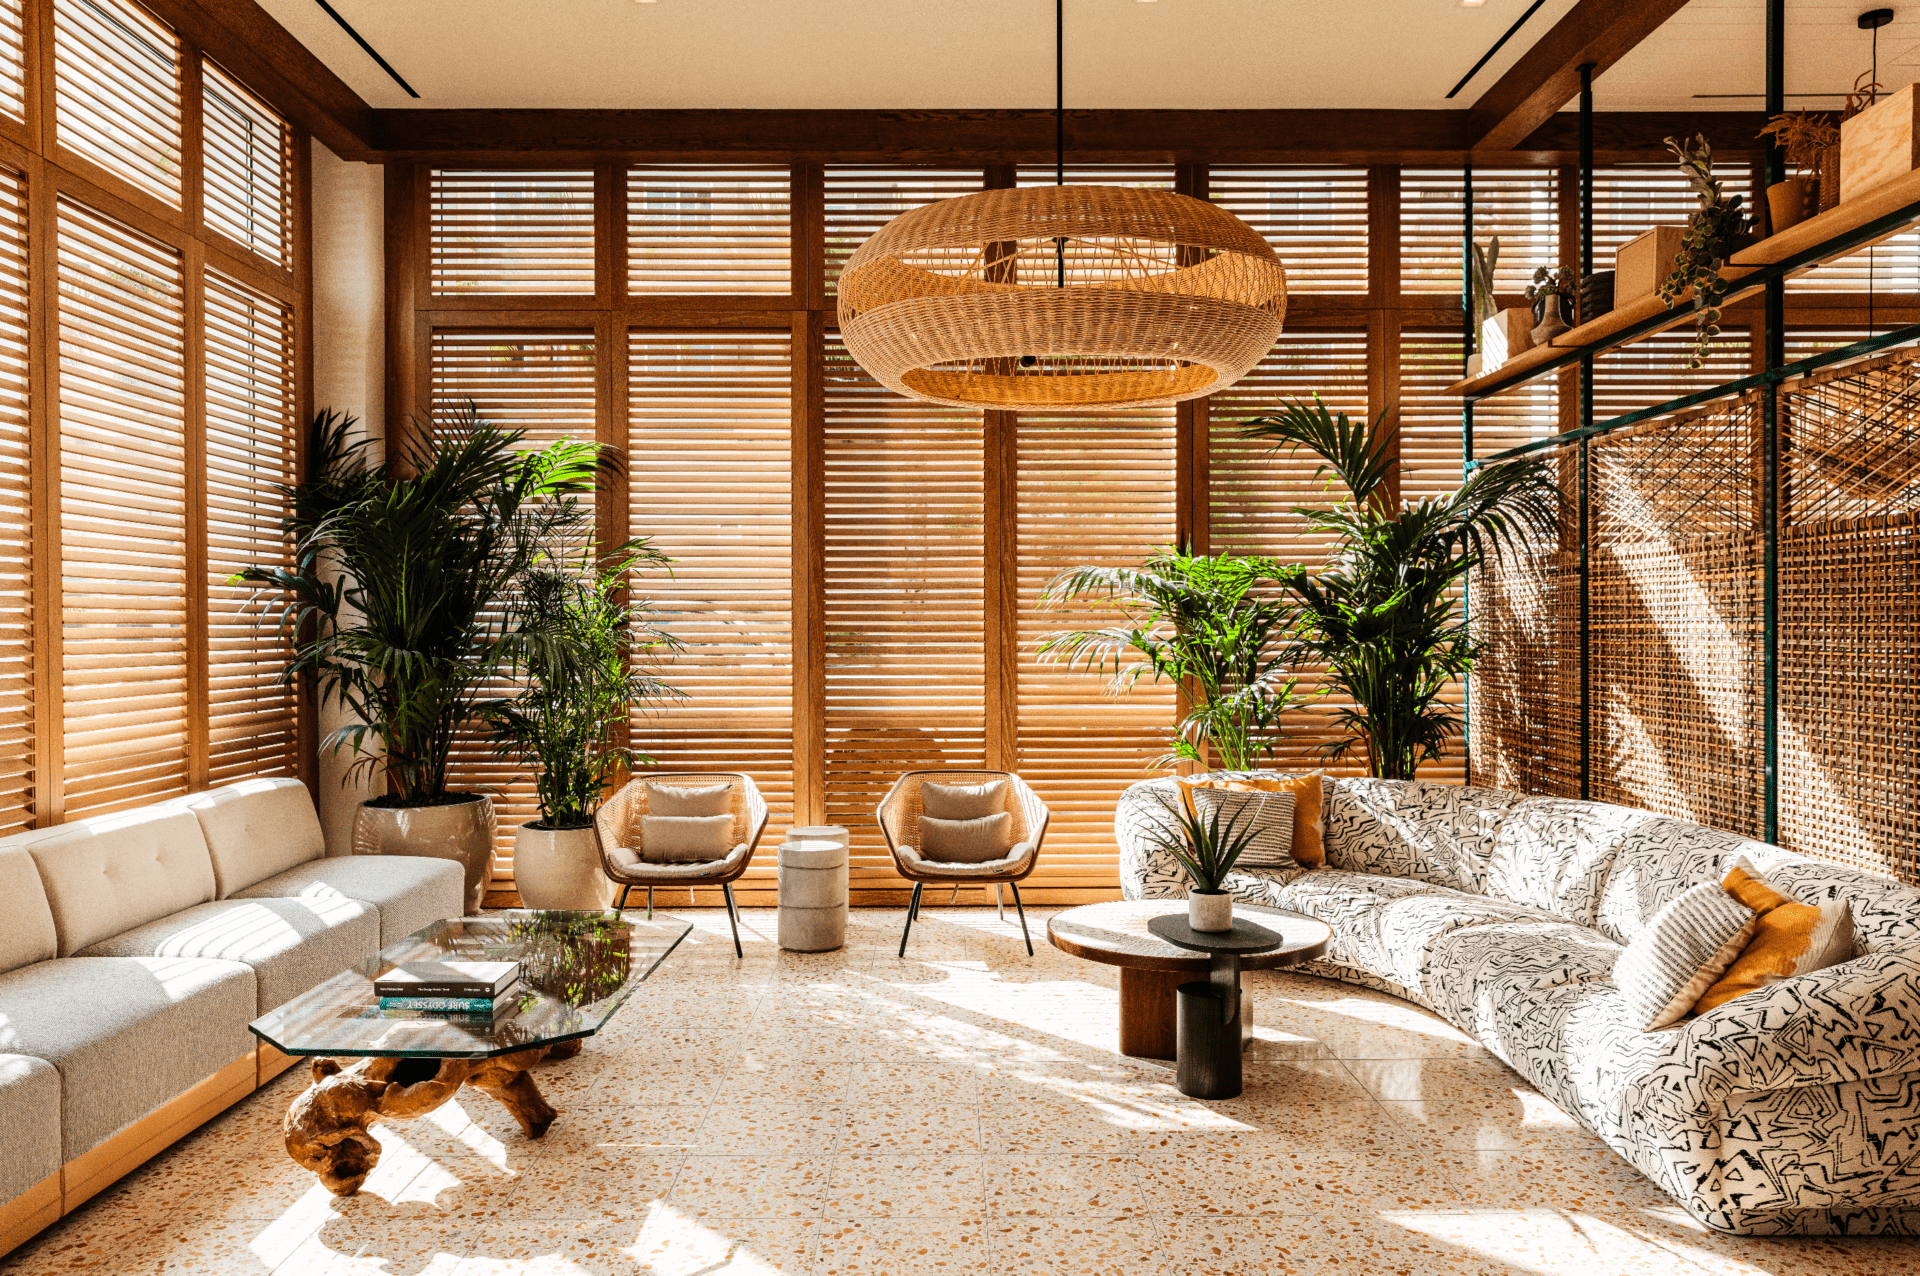 The best places to stay in LA | An interior view at The Hotel June. Wooden blinds cover the windows, a rattan light shade hangs from the centre of the ceiling, and two sofas flank the lounge on either side